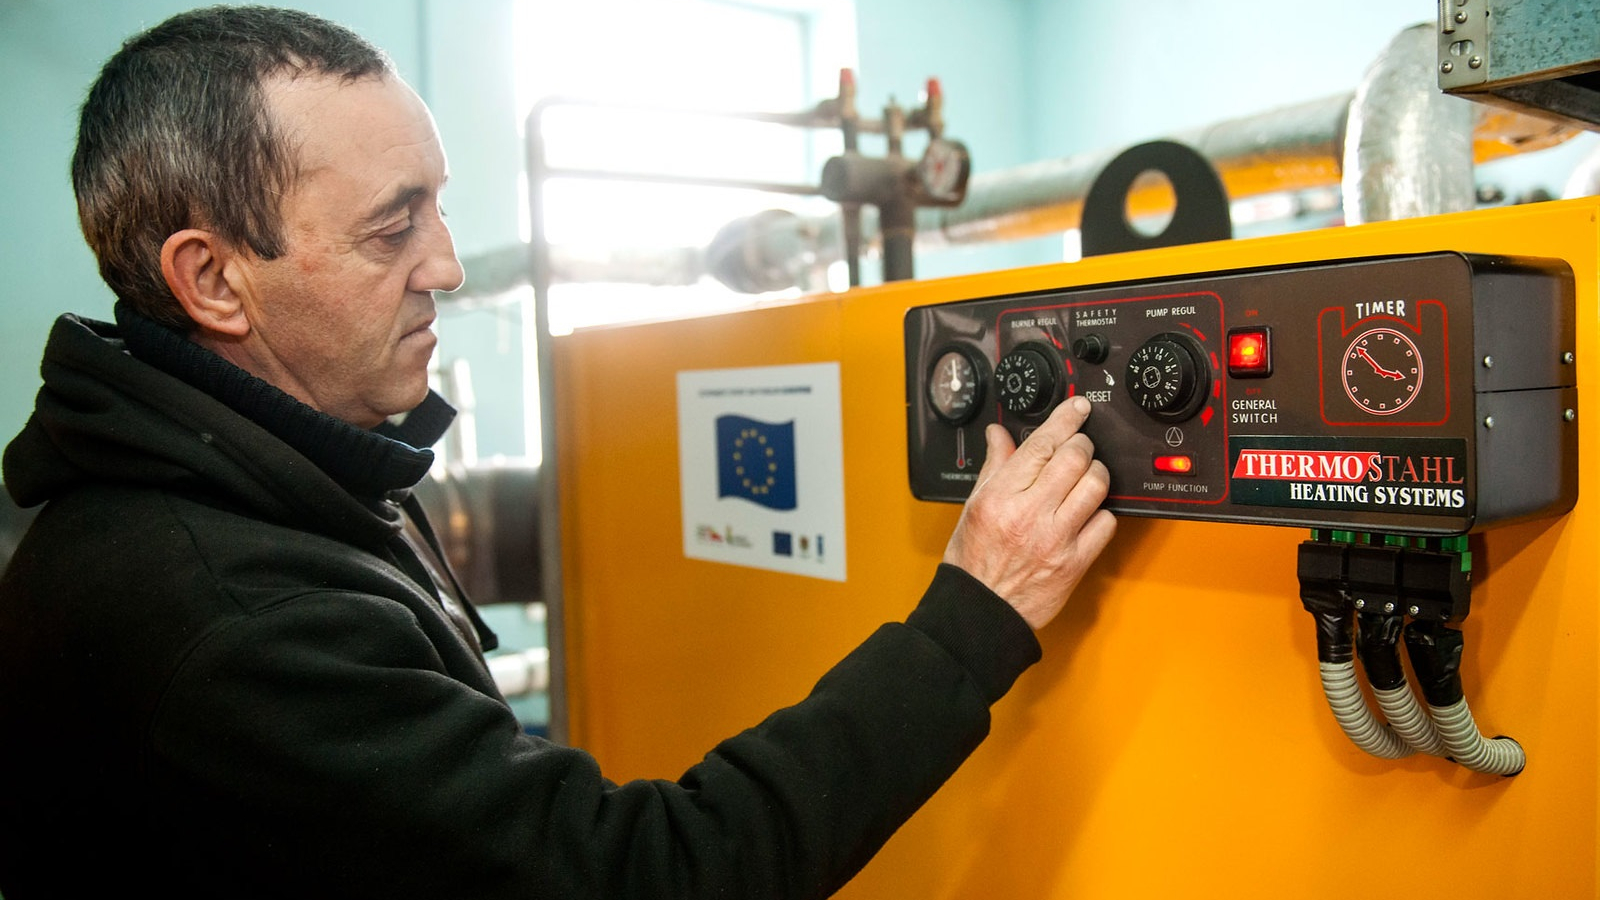 EU supports seven new energy efficiency and water infrastructure projects in Moldova